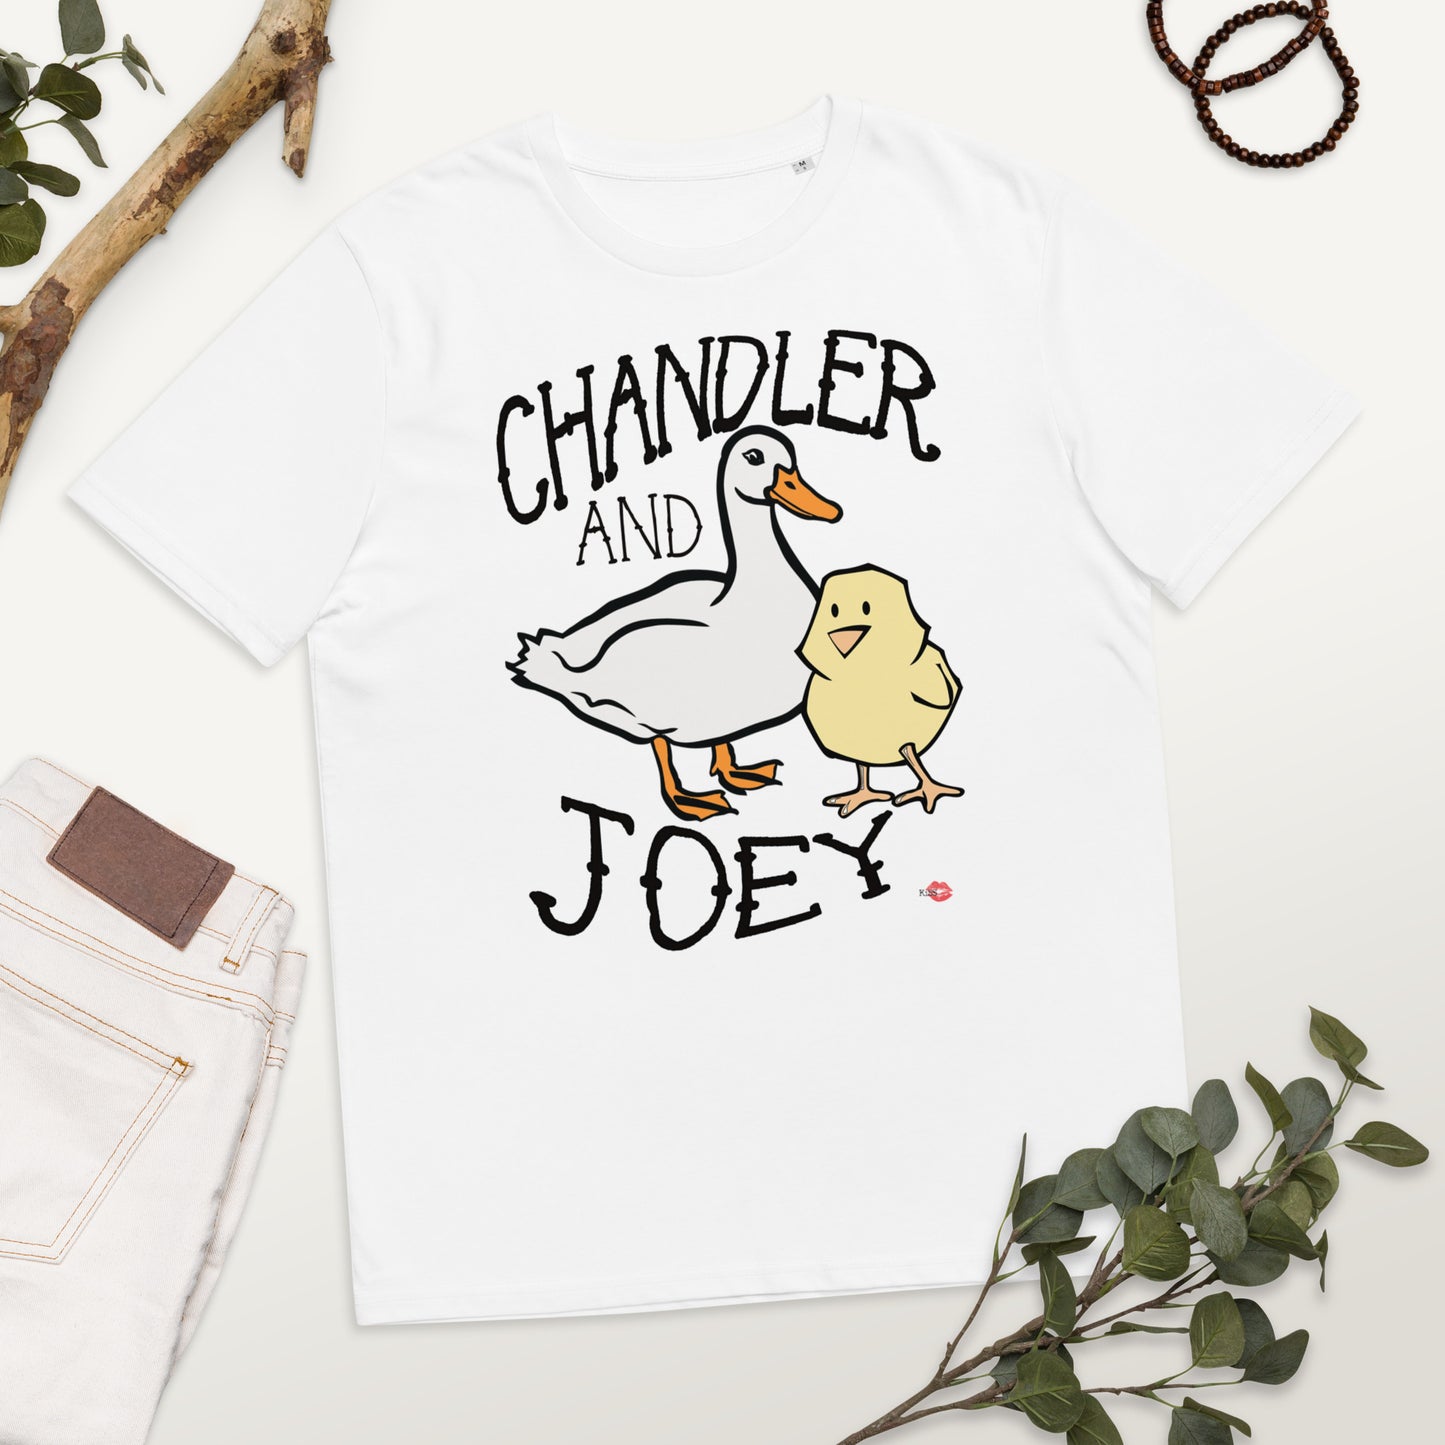 Joey and Chandler KiSS Unisex organic cotton t-shirt - Friends Show inspired Chick & Duck